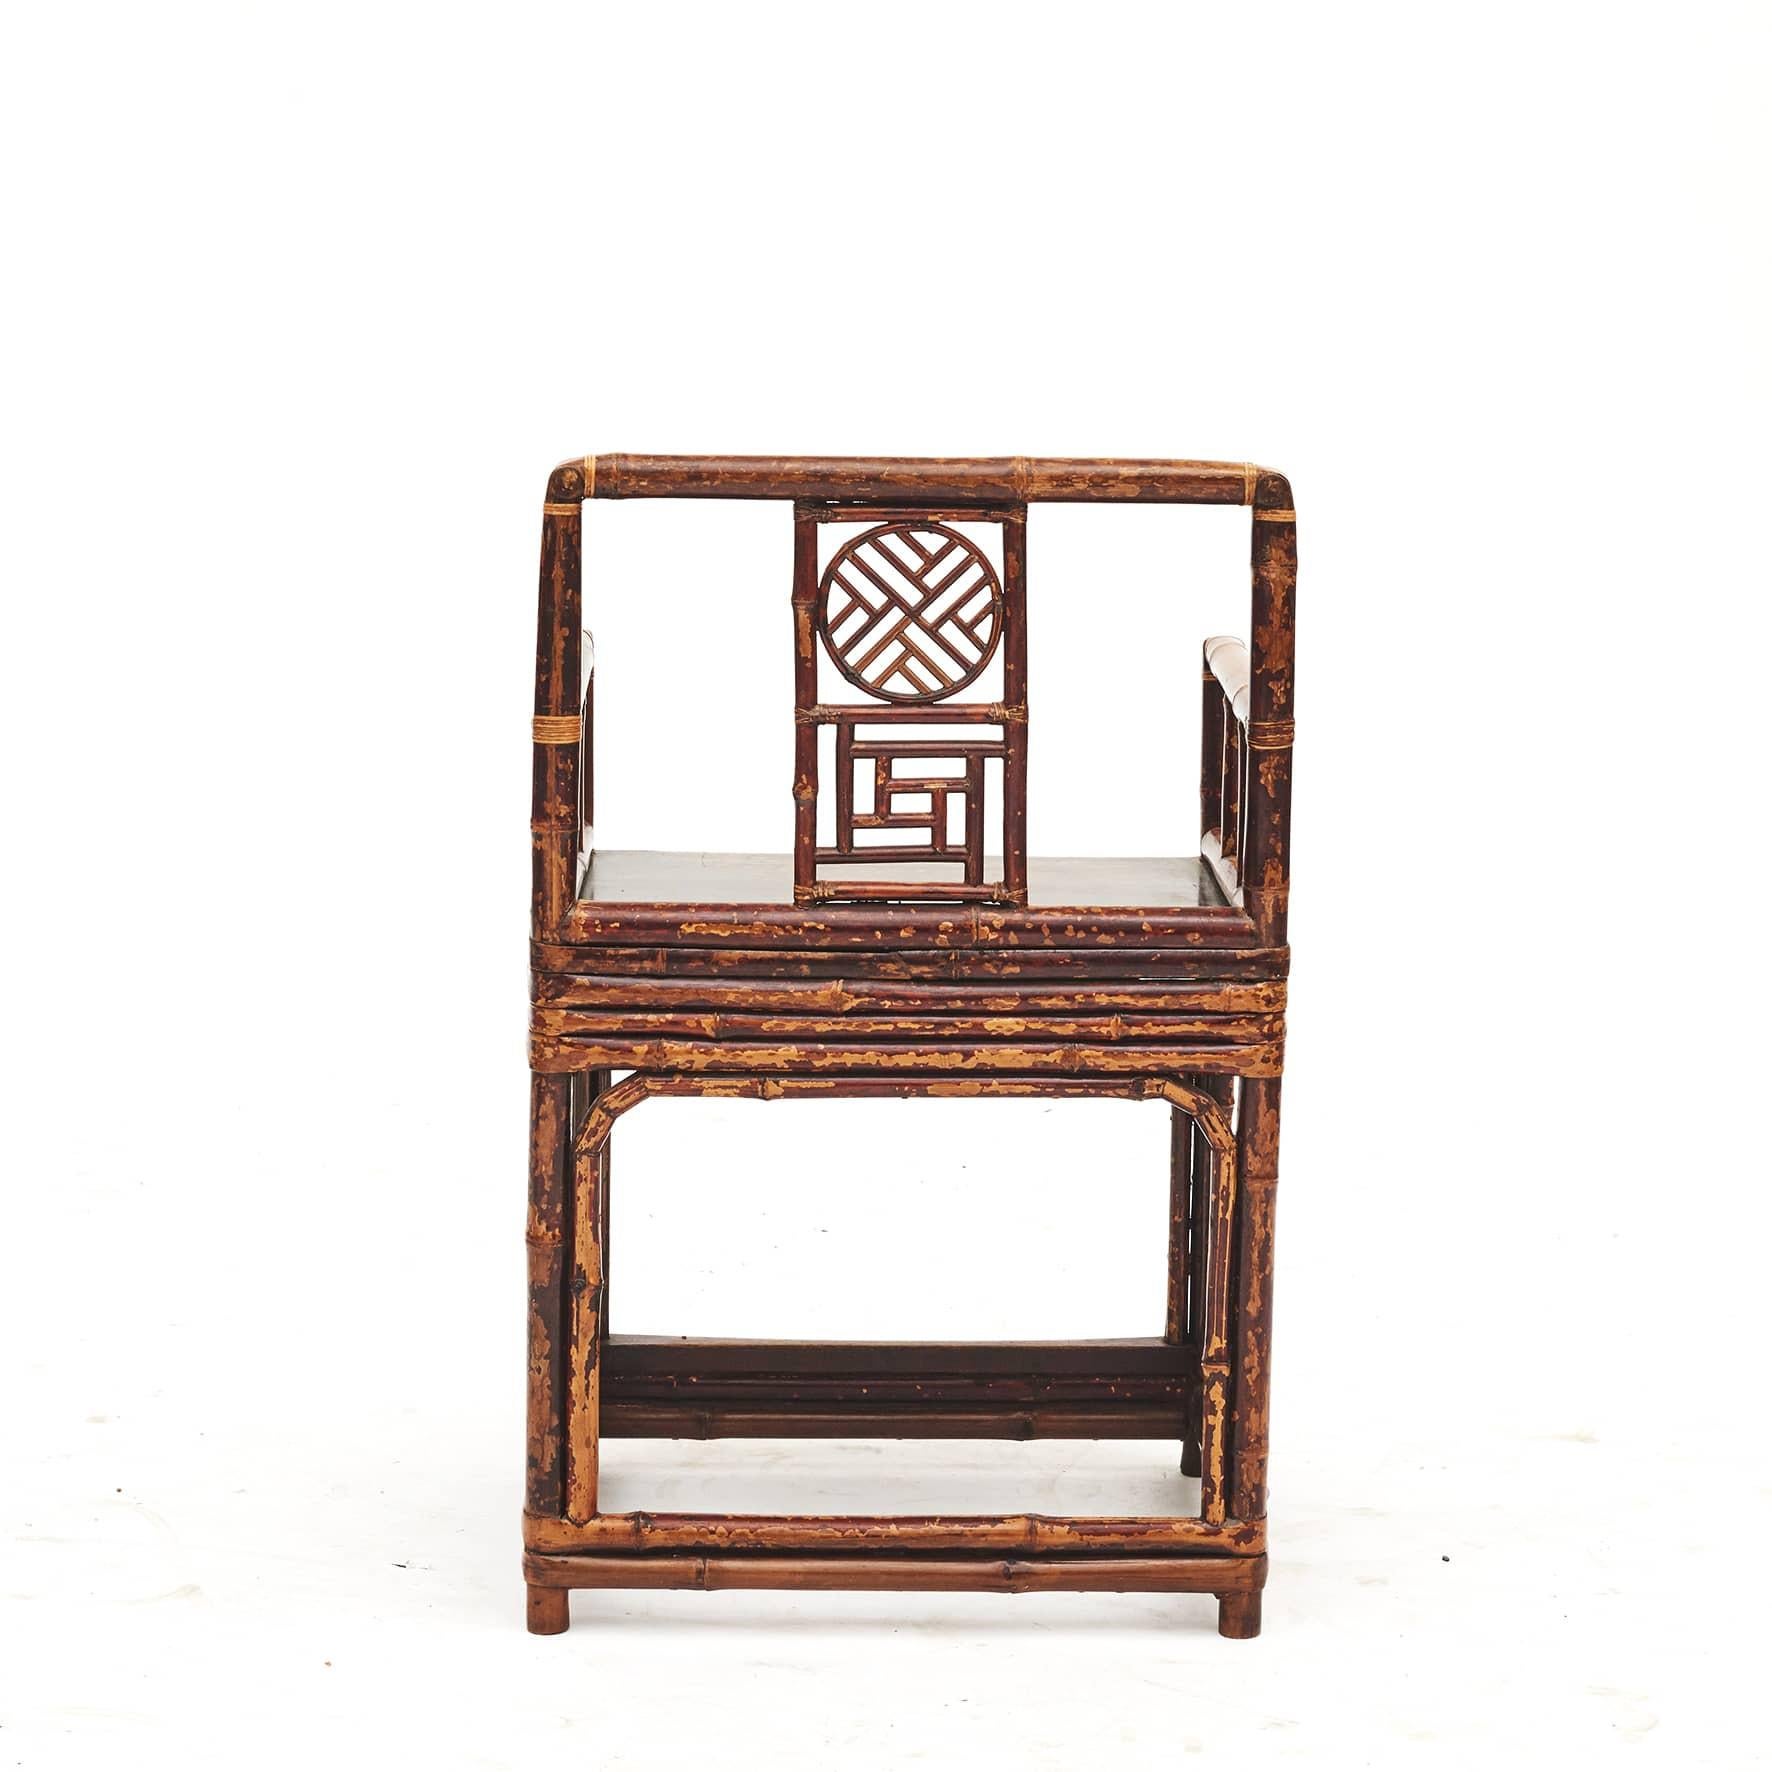 Pair of Chinese bamboo arm chairs with plain flat linden wood seat (linden wood is also called lime tree).
Black and burgundy lacquer with beautiful natural age-related patina highlighted by a new clear lacquer finish.
Original condition. China,